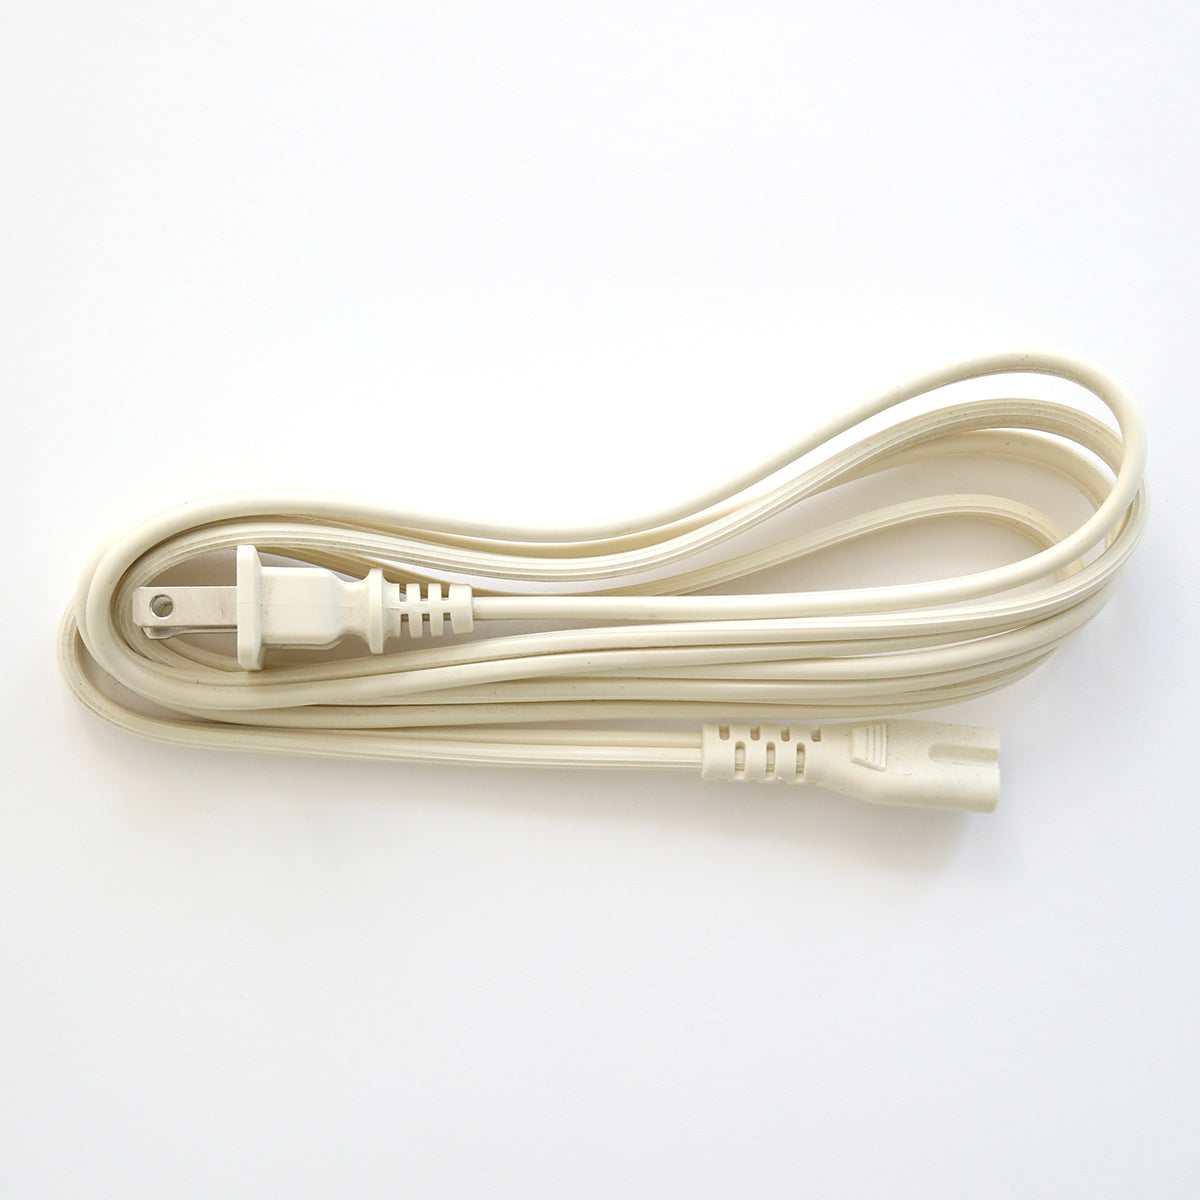 A white Power Cord for Empress Machine on a white surface, suitable for use as replacement cords for Empress Mini Machines.